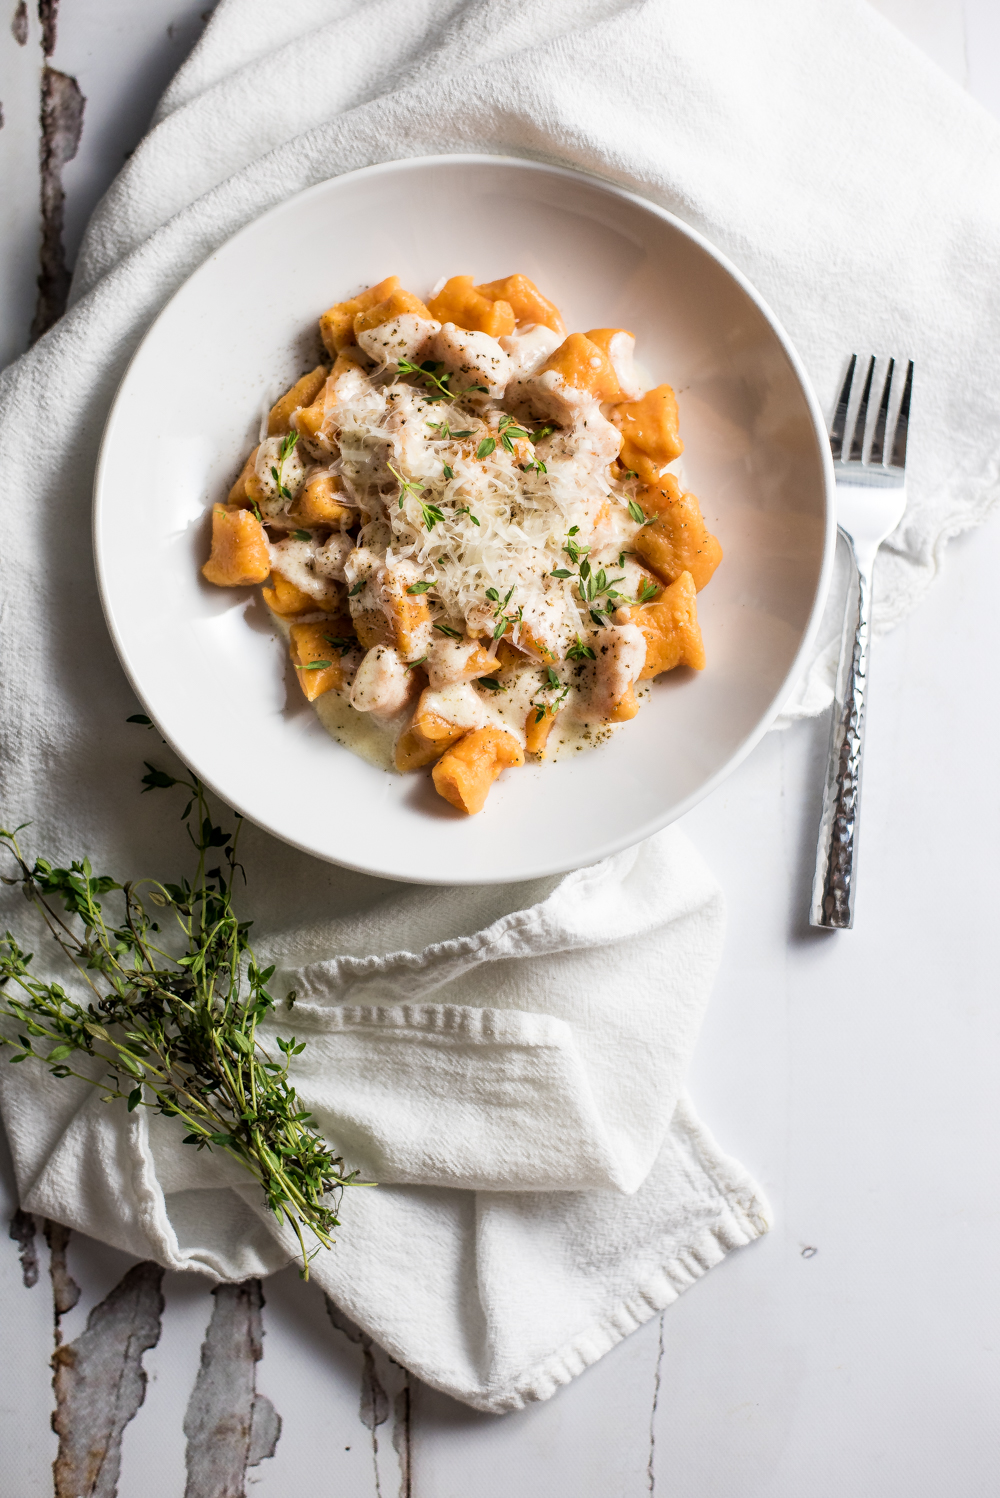 Homemade sweet potato gnocchi in brown butter cream sauce is much simpler to make than you think! It is super delicious and loaded with flavor and texture!